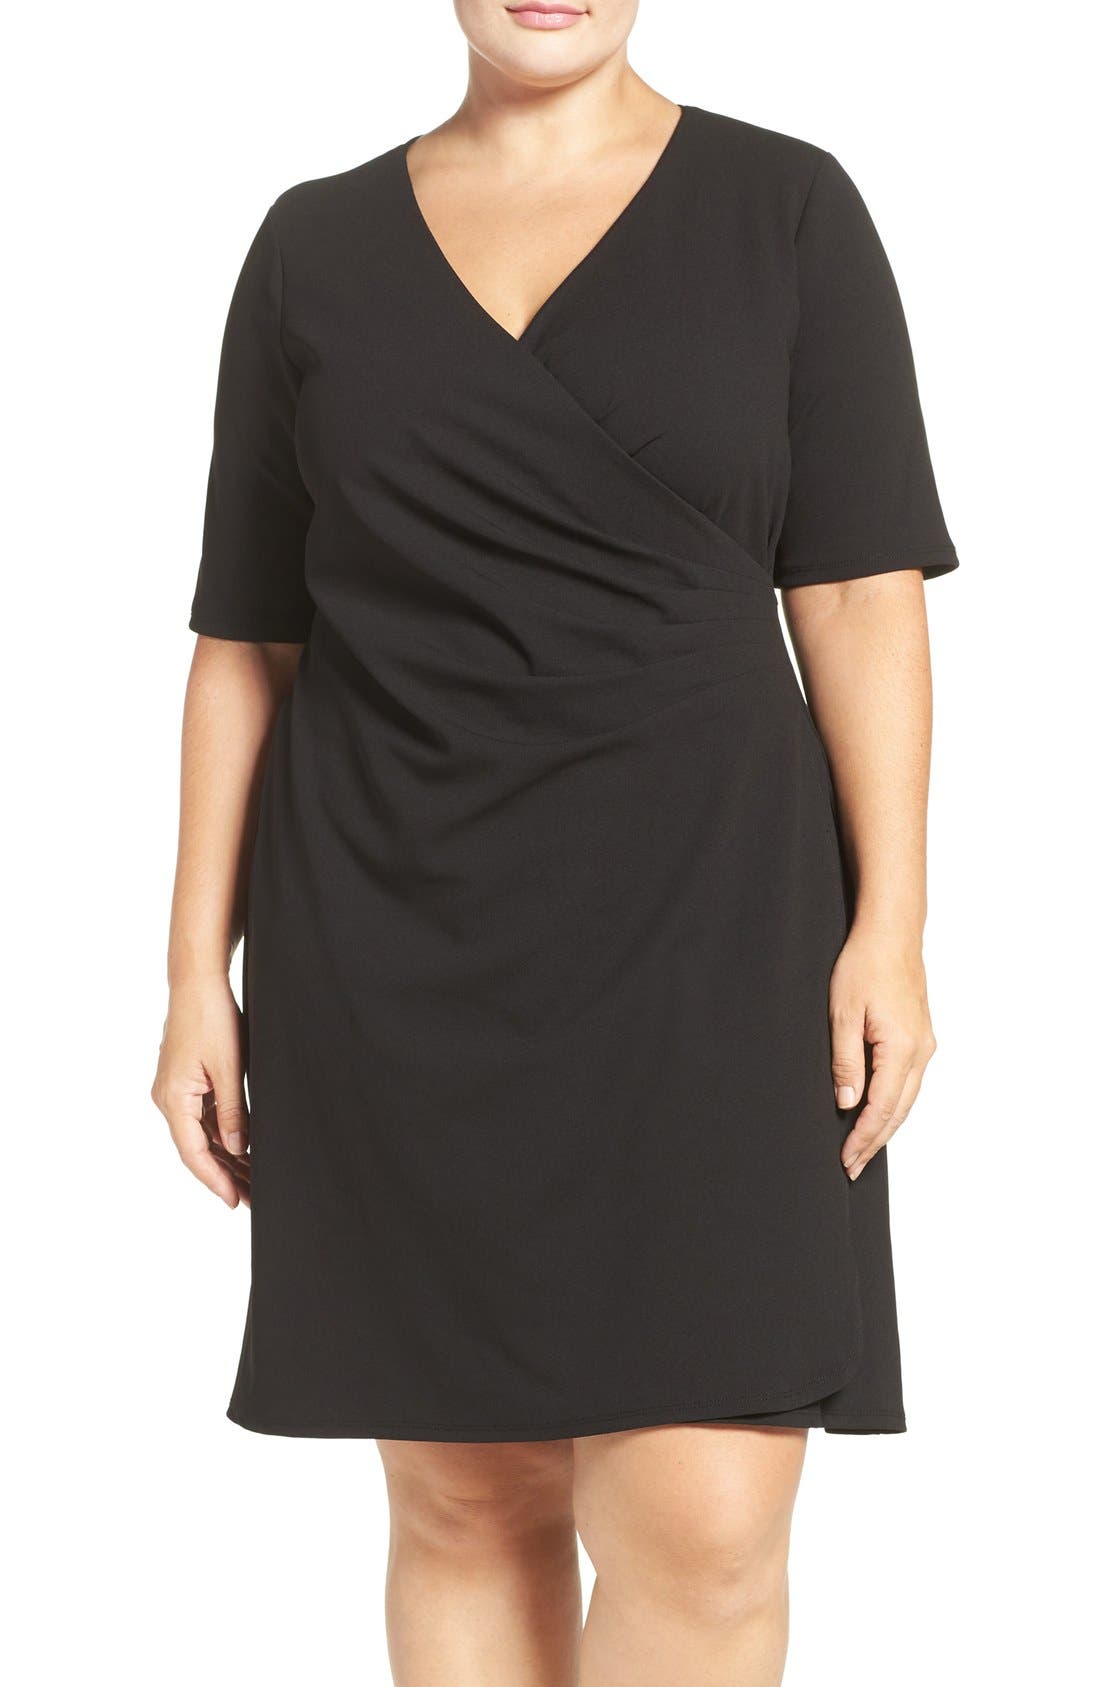 adrianna papell plus size dresses nordstrom